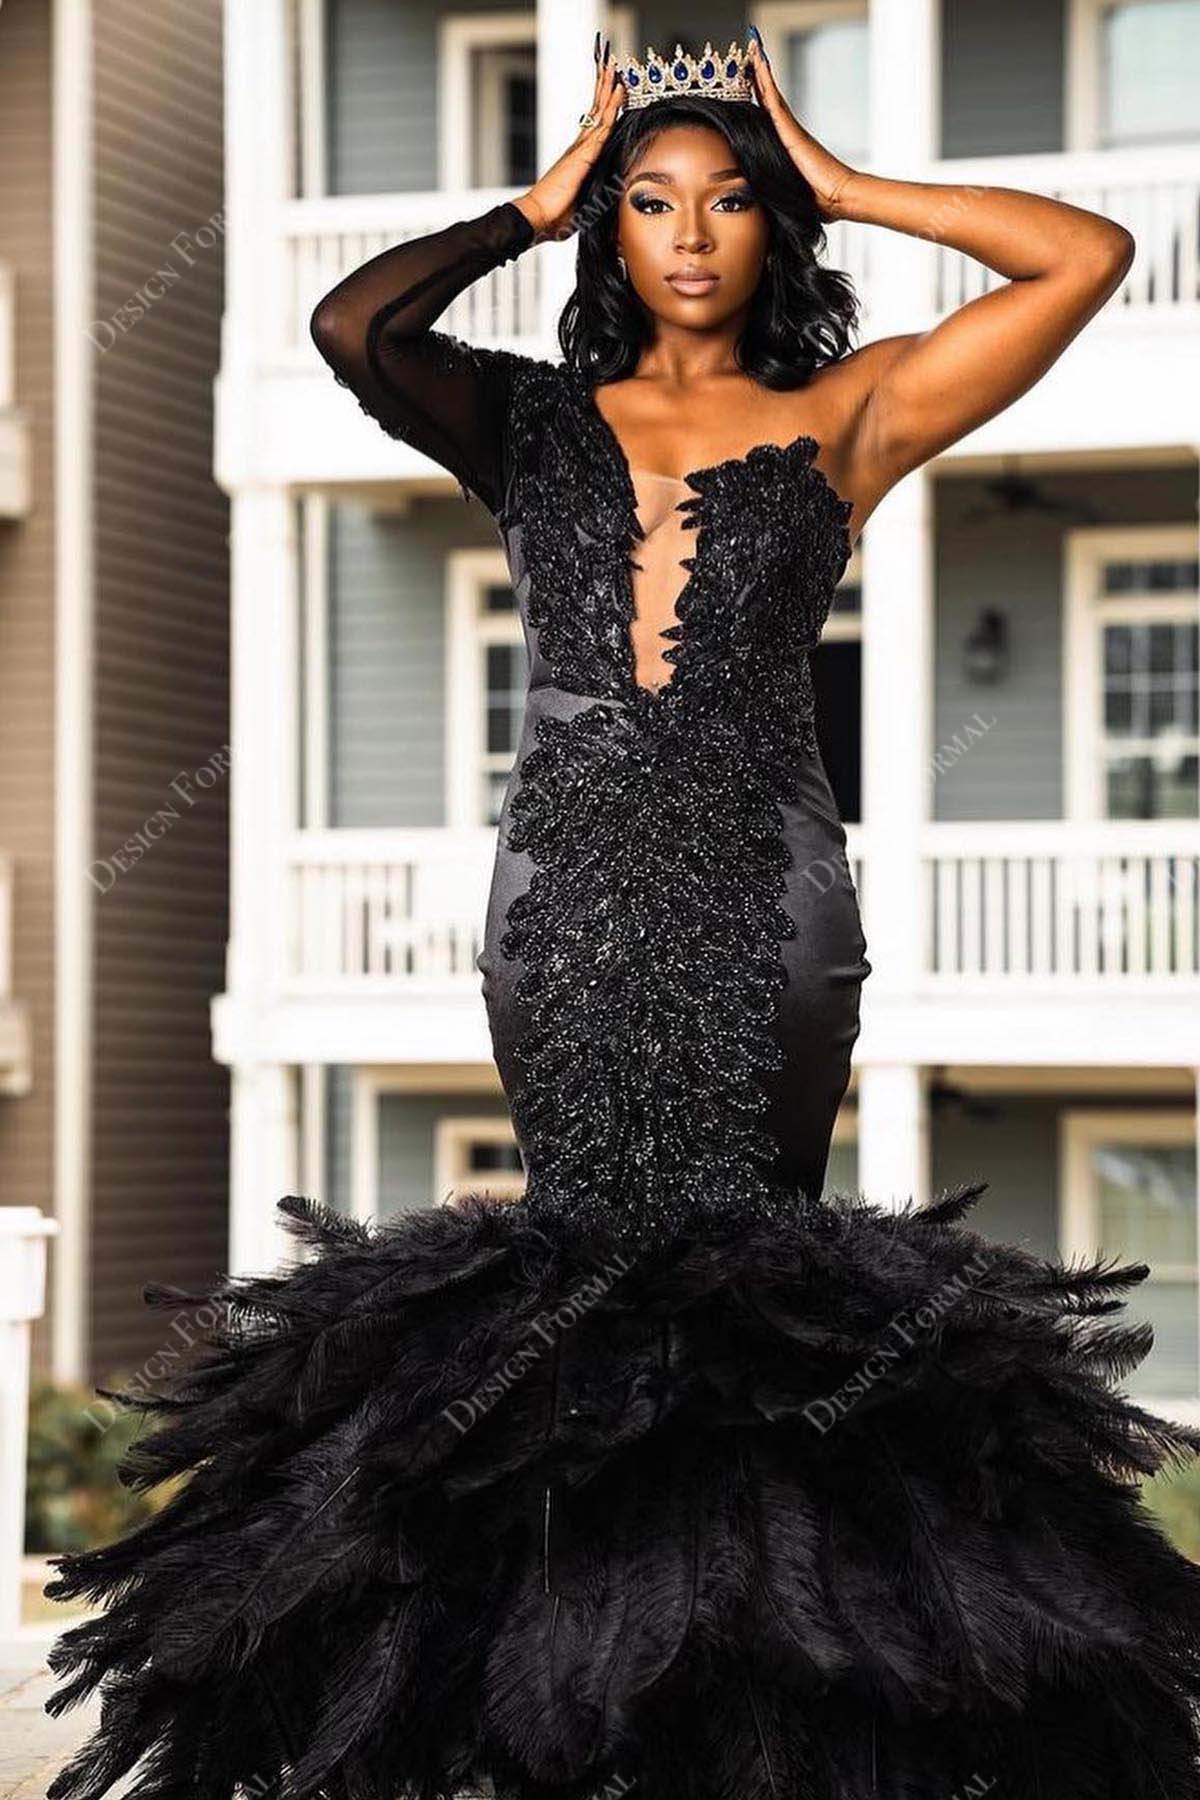 black prom dress with lace